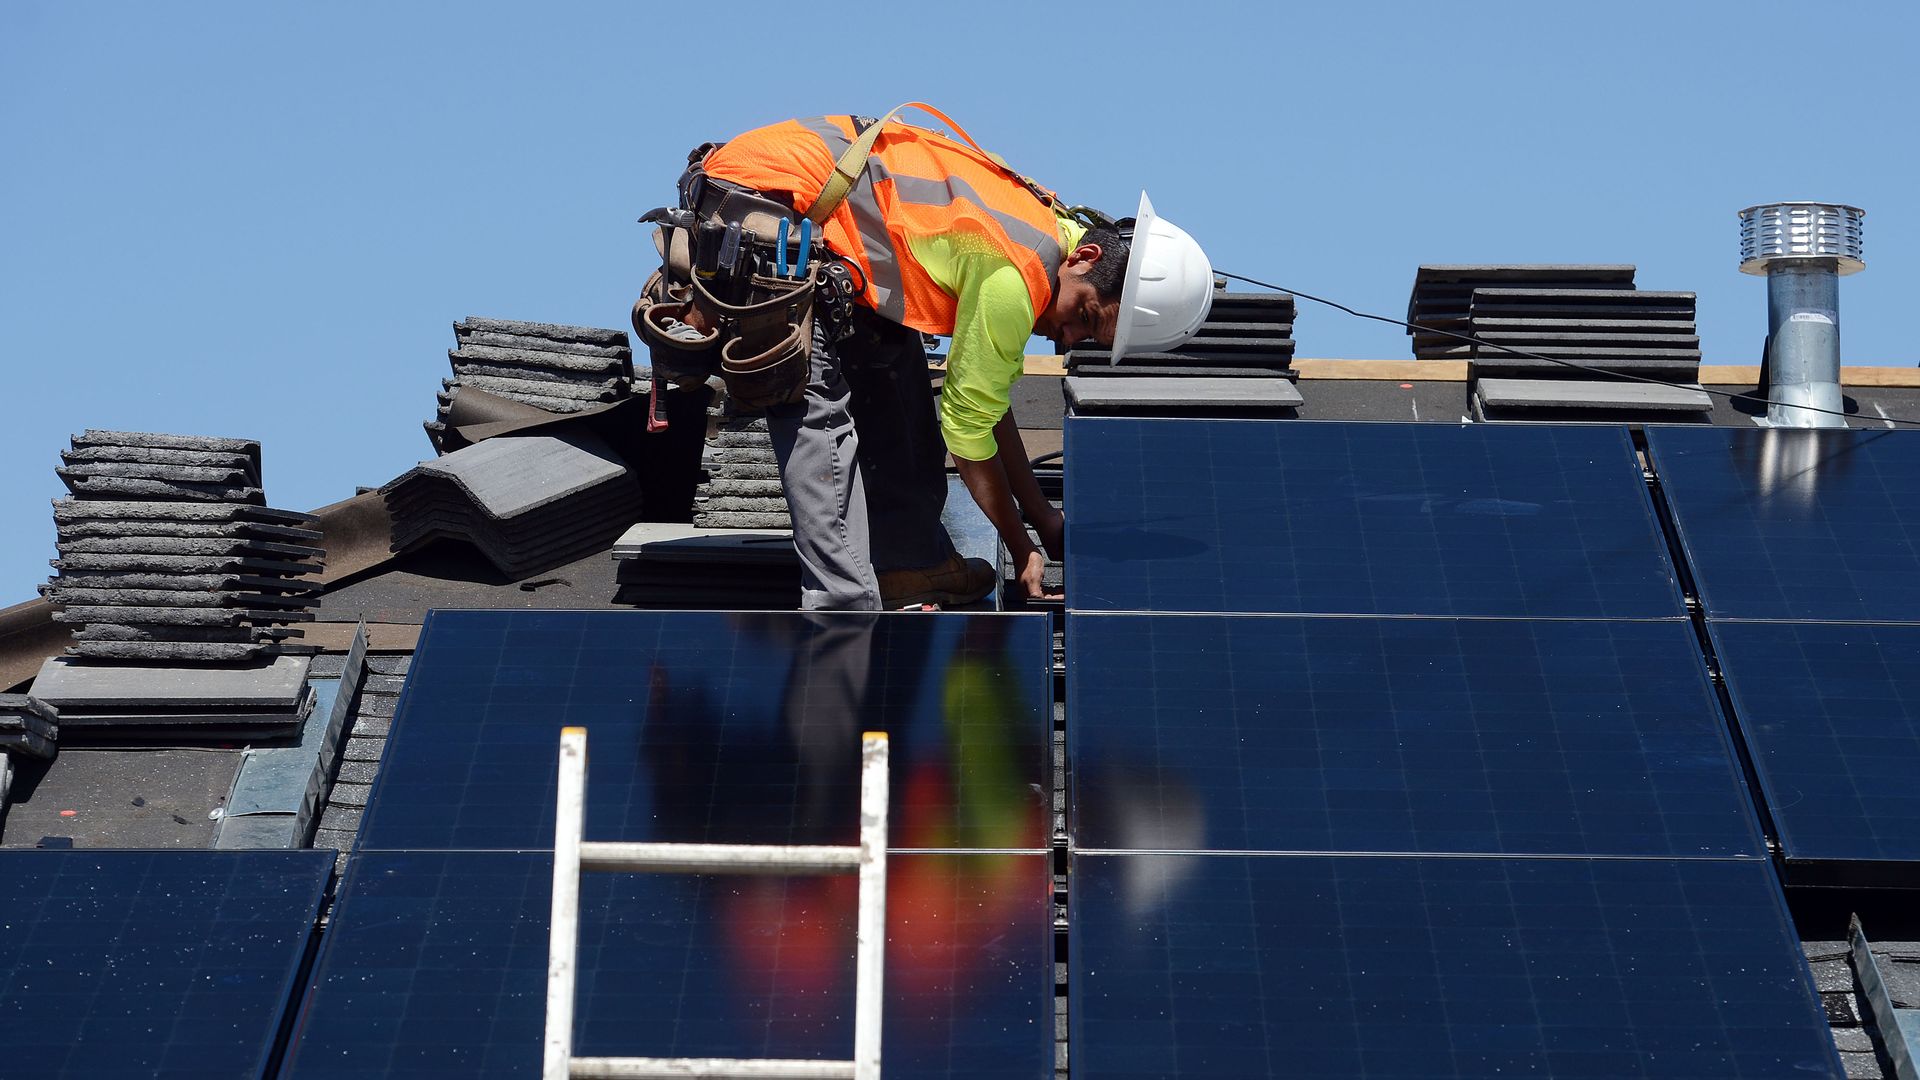 A worker installs solar panels on a roof